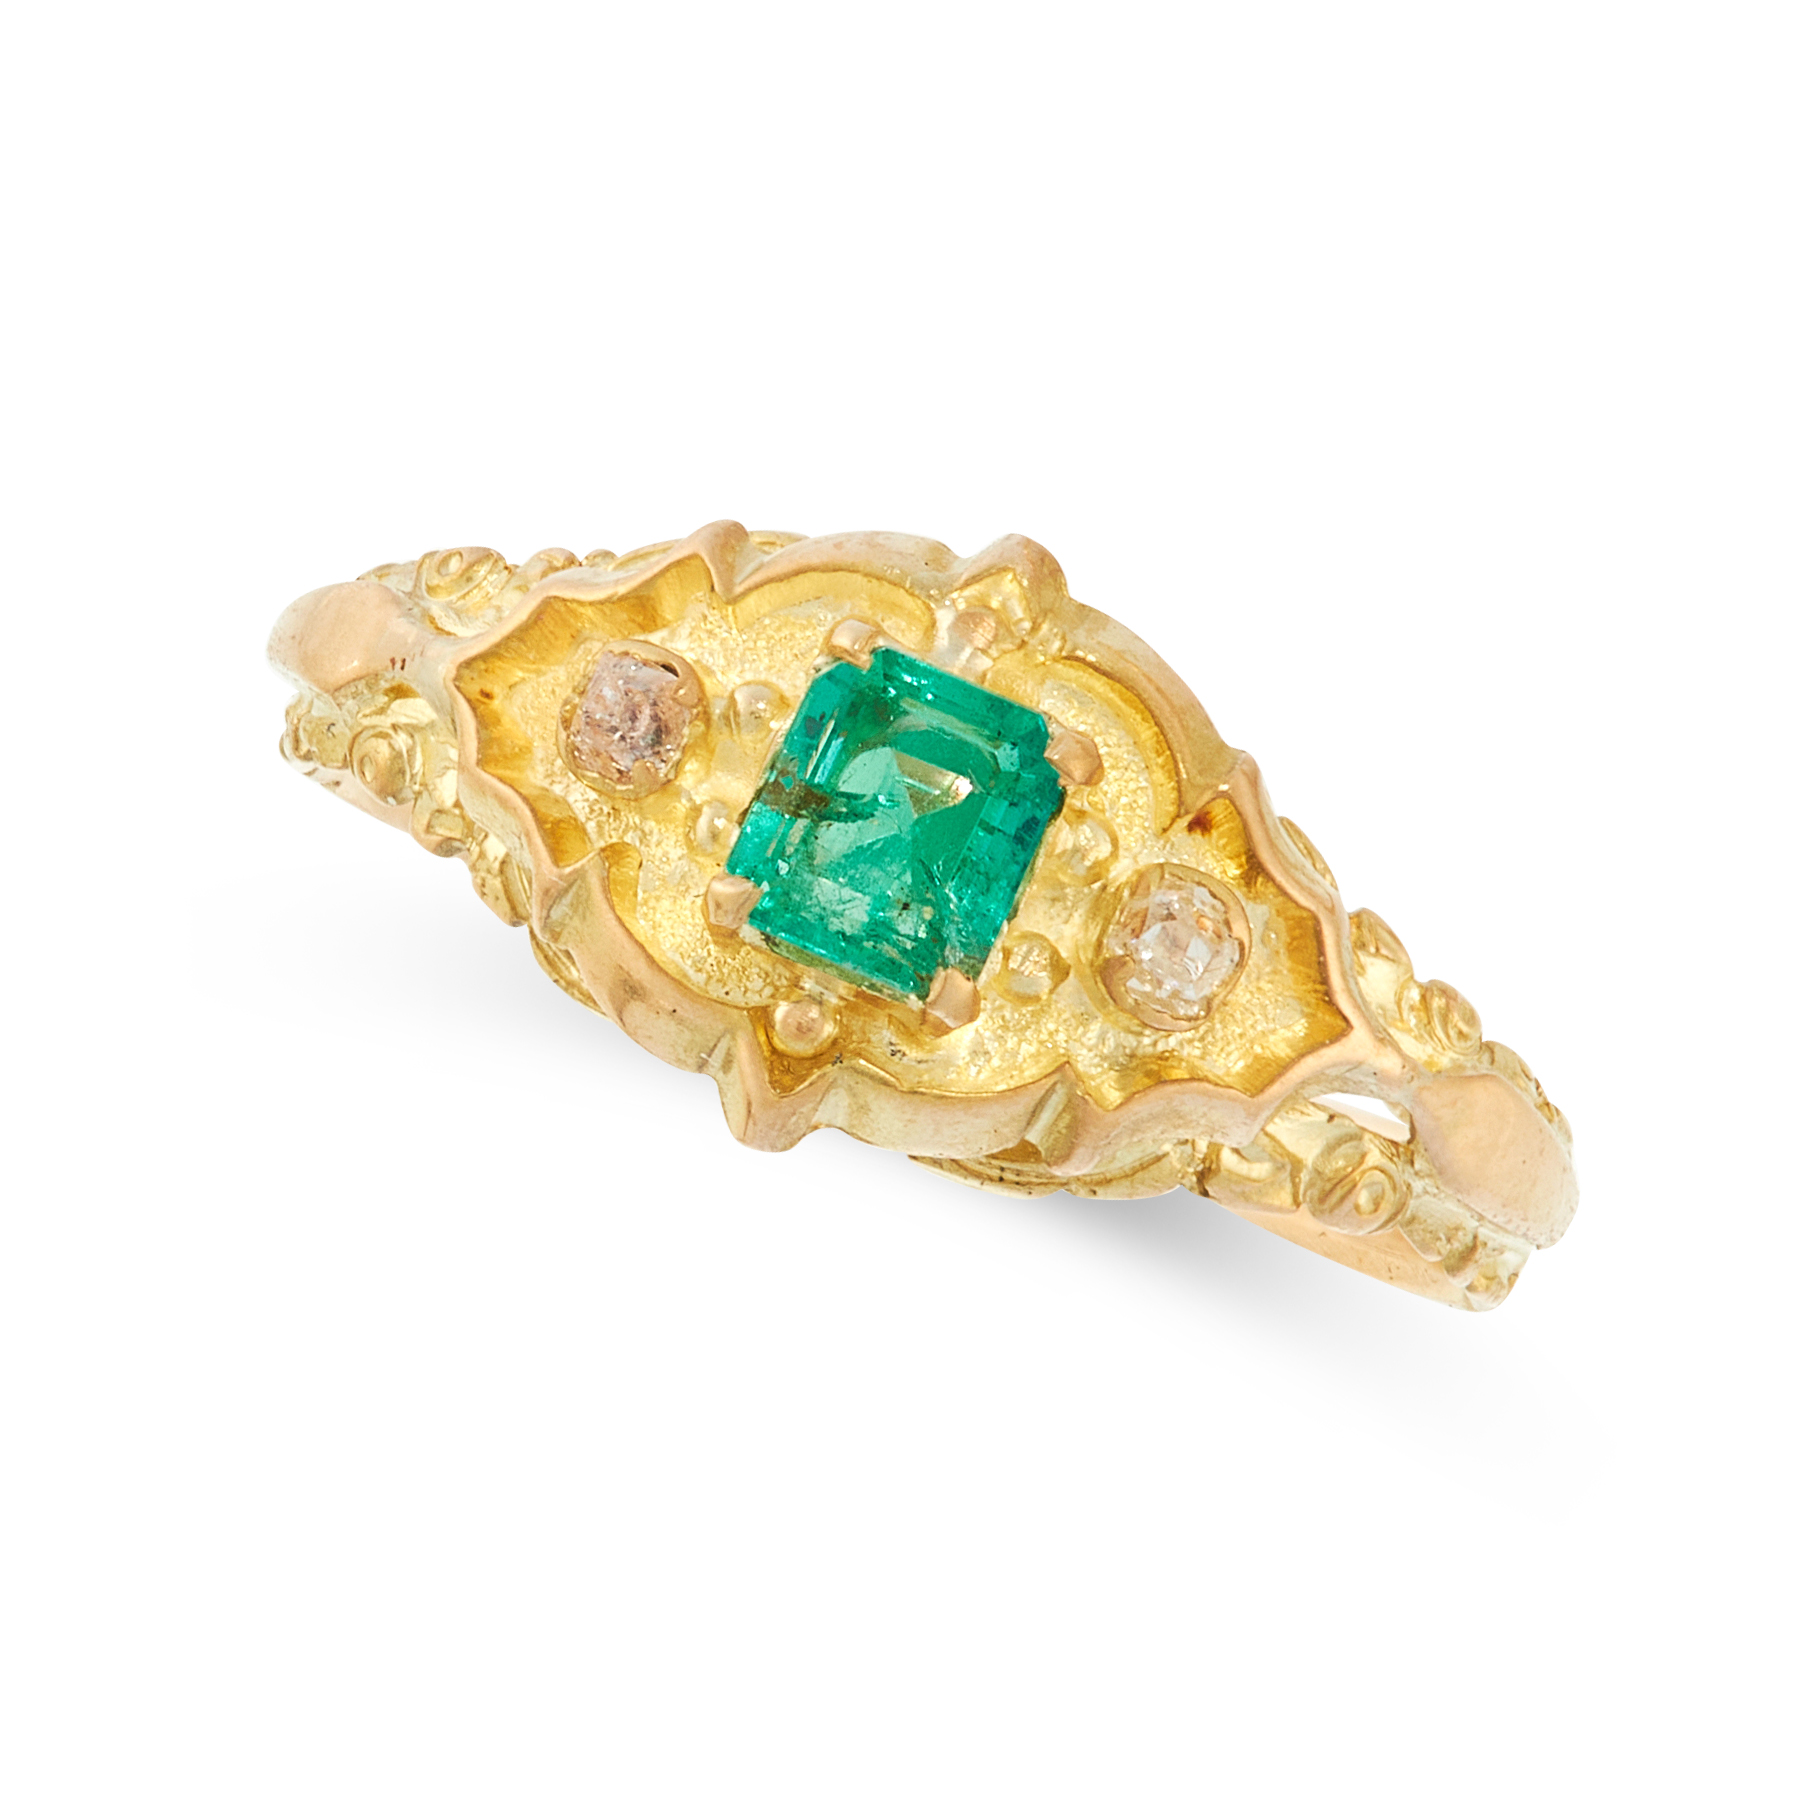 AN ANTIQUE EMERALD AND DIAMOND RING in high carat yellow gold, set with an emerald cut emerald